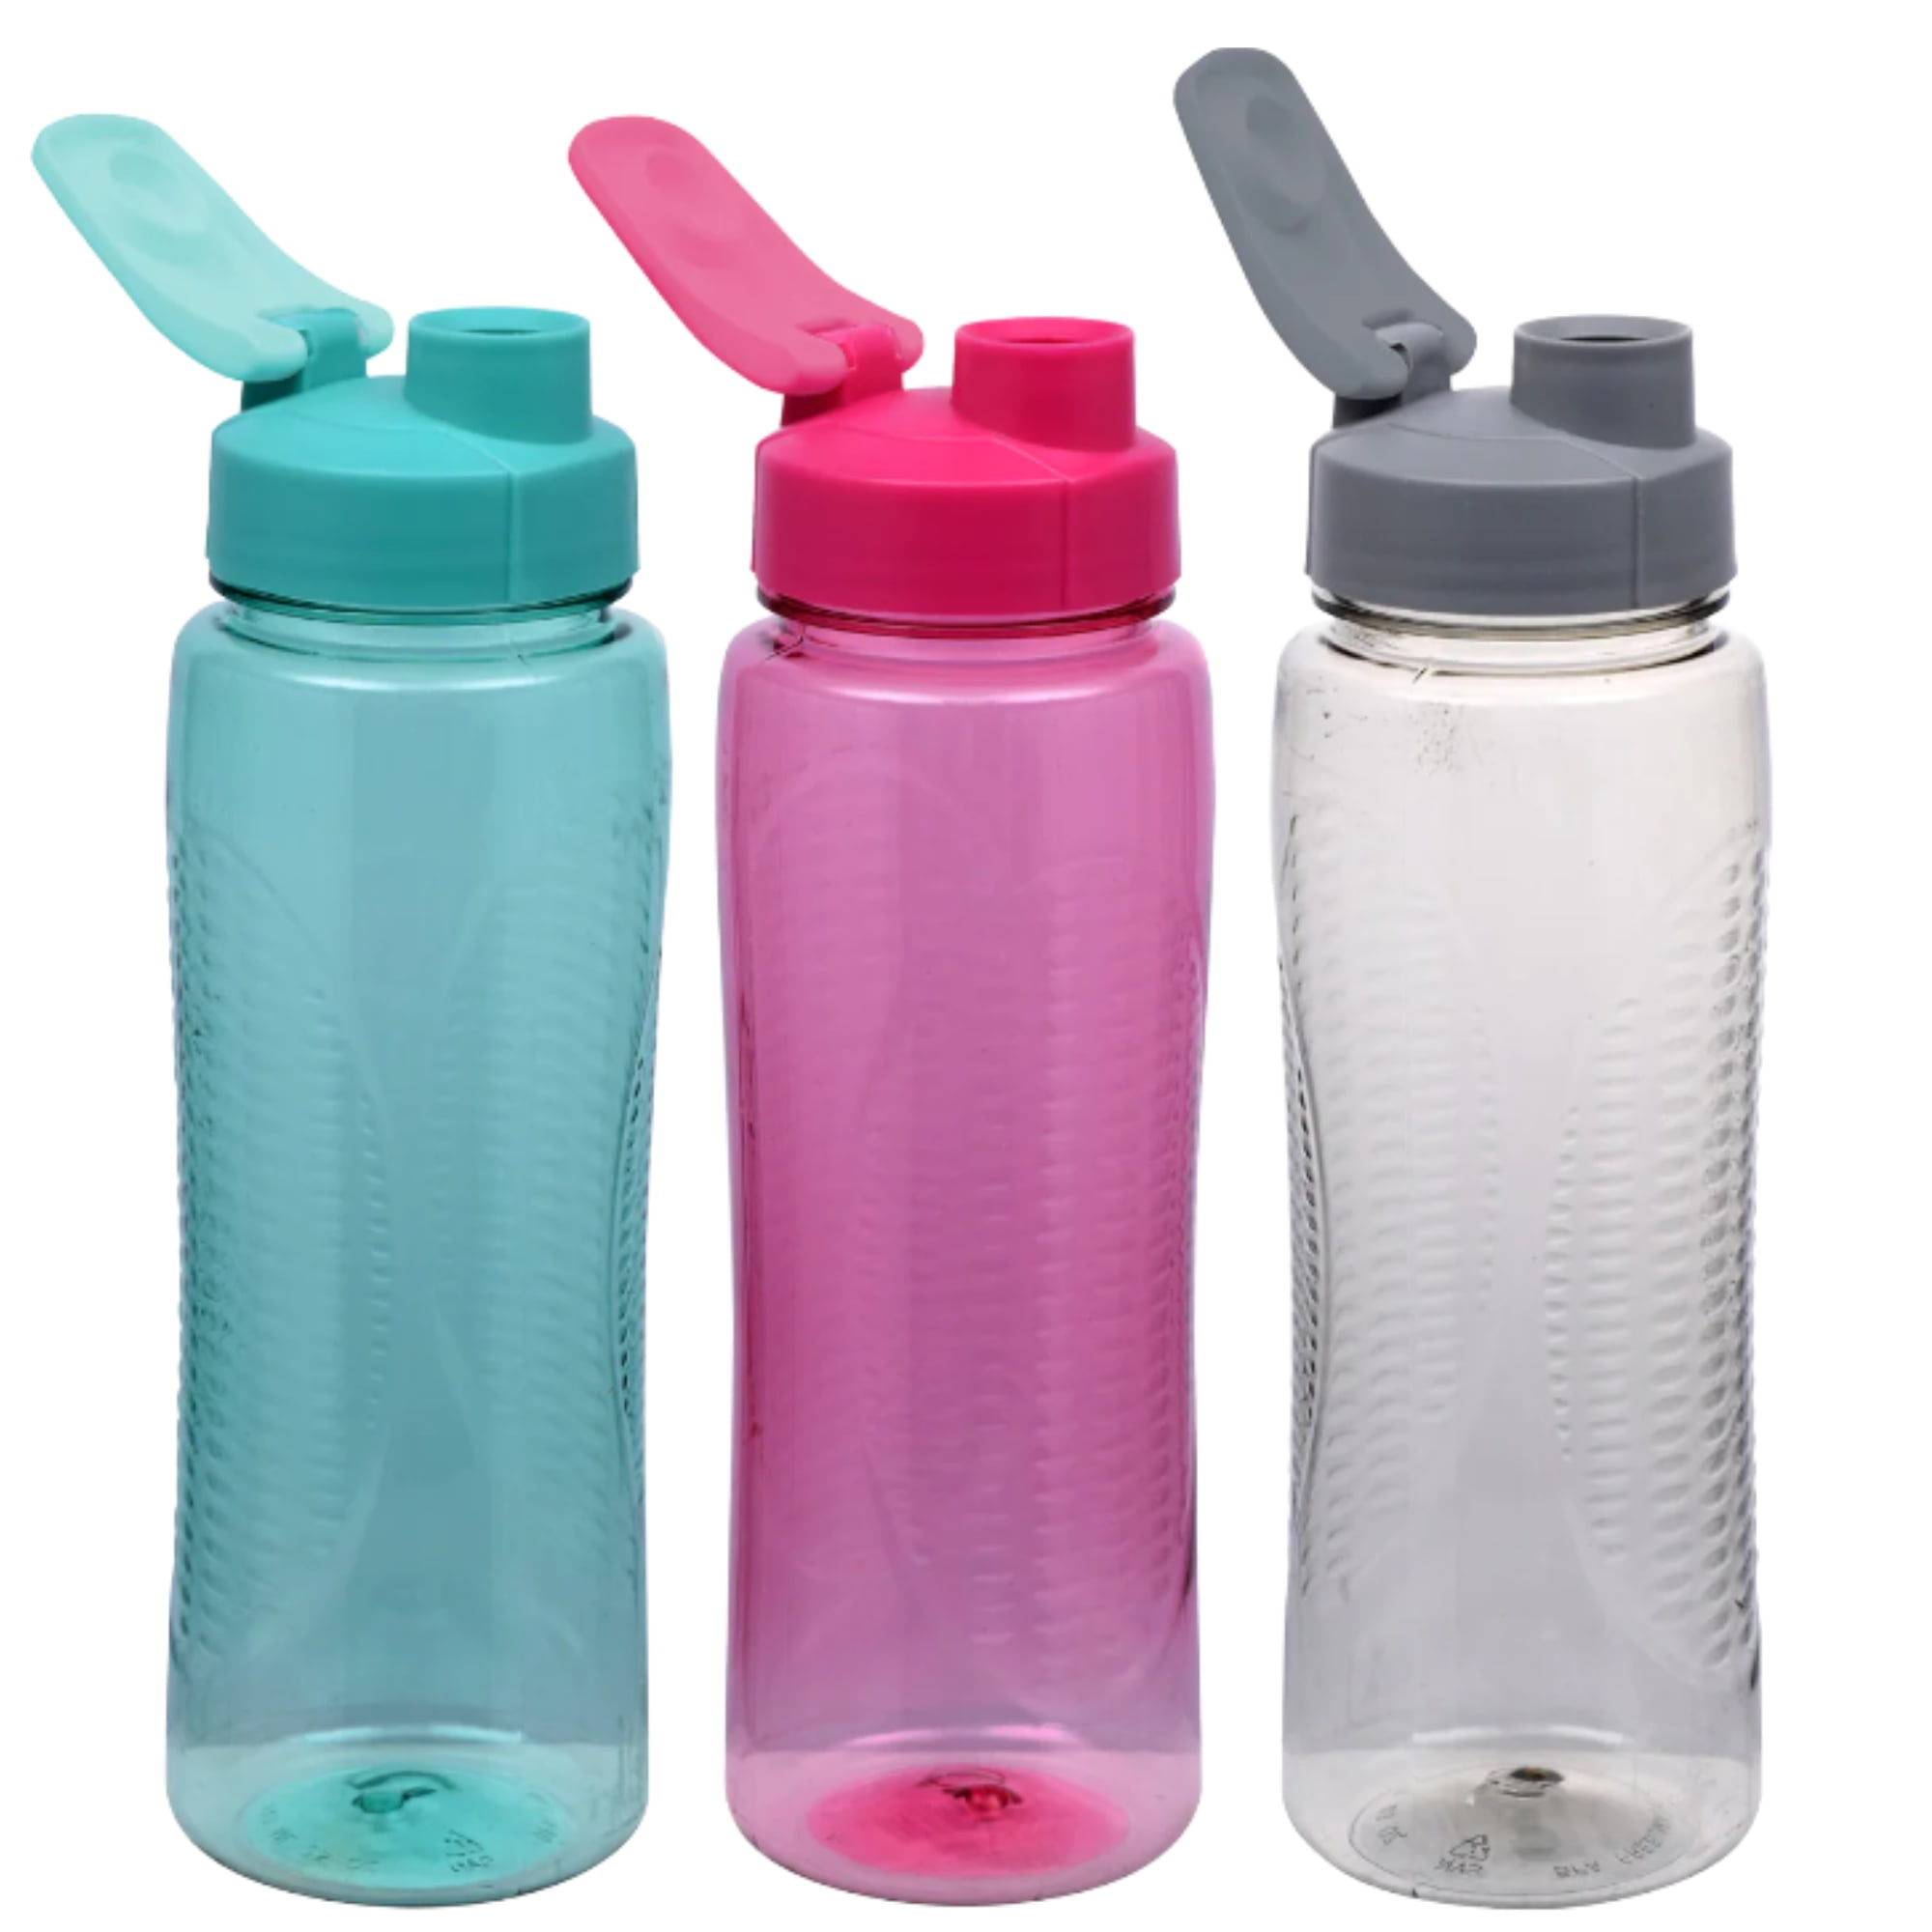  Official Kawaii Water Bottle 500ml Merchandise / 17OZ,  Stainless Steel, Vacuum Insulated Water Bottle, Double Wall Reusable Water  Bottle With Carabiner, BPA Free - Kawaii Stuff: Home & Kitchen